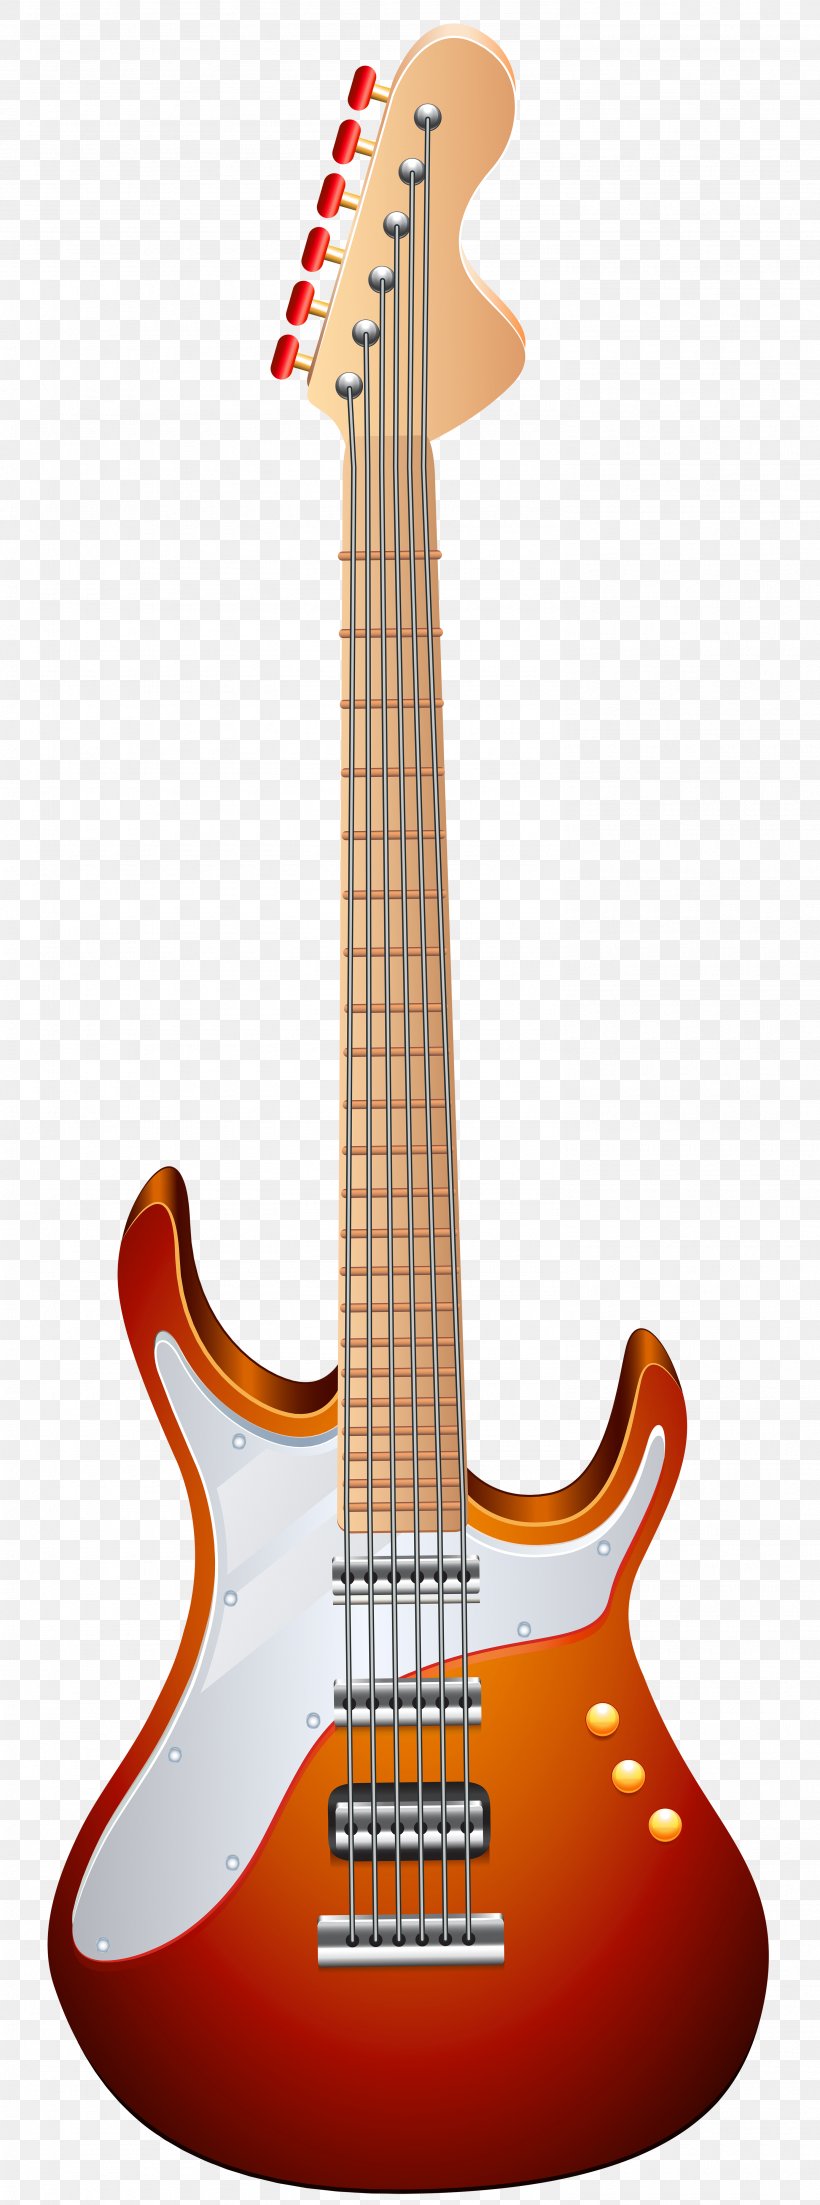 Electric Guitar Musical Instruments Acoustic Guitar String Instruments, PNG, 2975x8000px, Guitar, Acoustic Electric Guitar, Acoustic Guitar, Acousticelectric Guitar, Bass Guitar Download Free